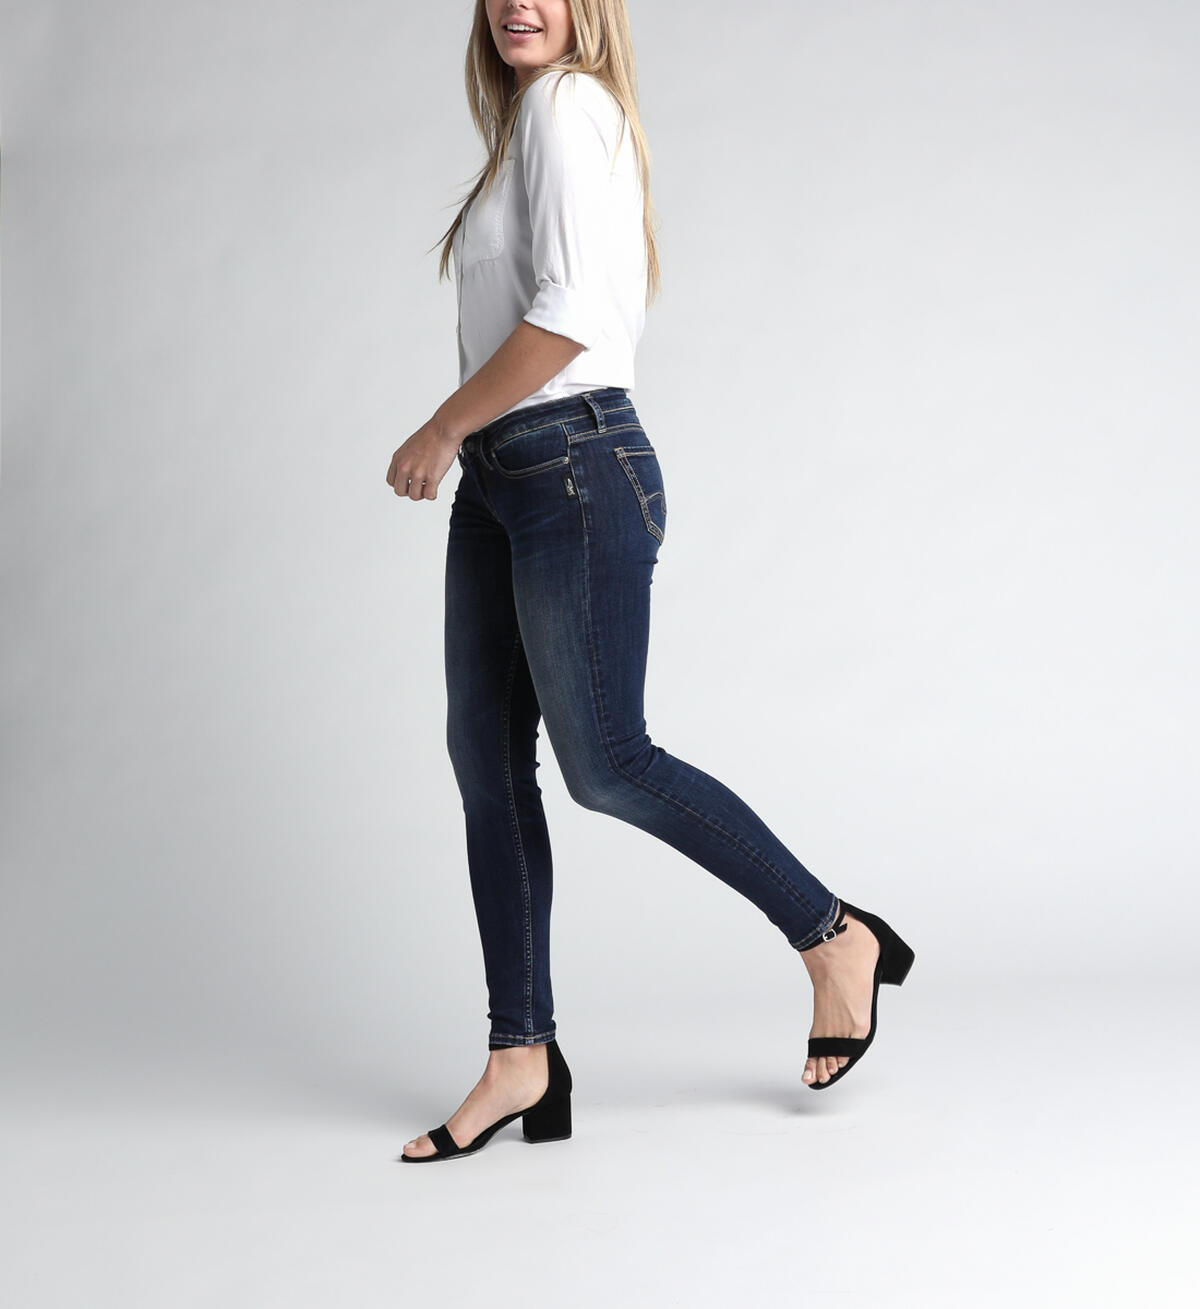 Tuesday Low Rise Skinny Leg Jeans, , hi-res image number 2